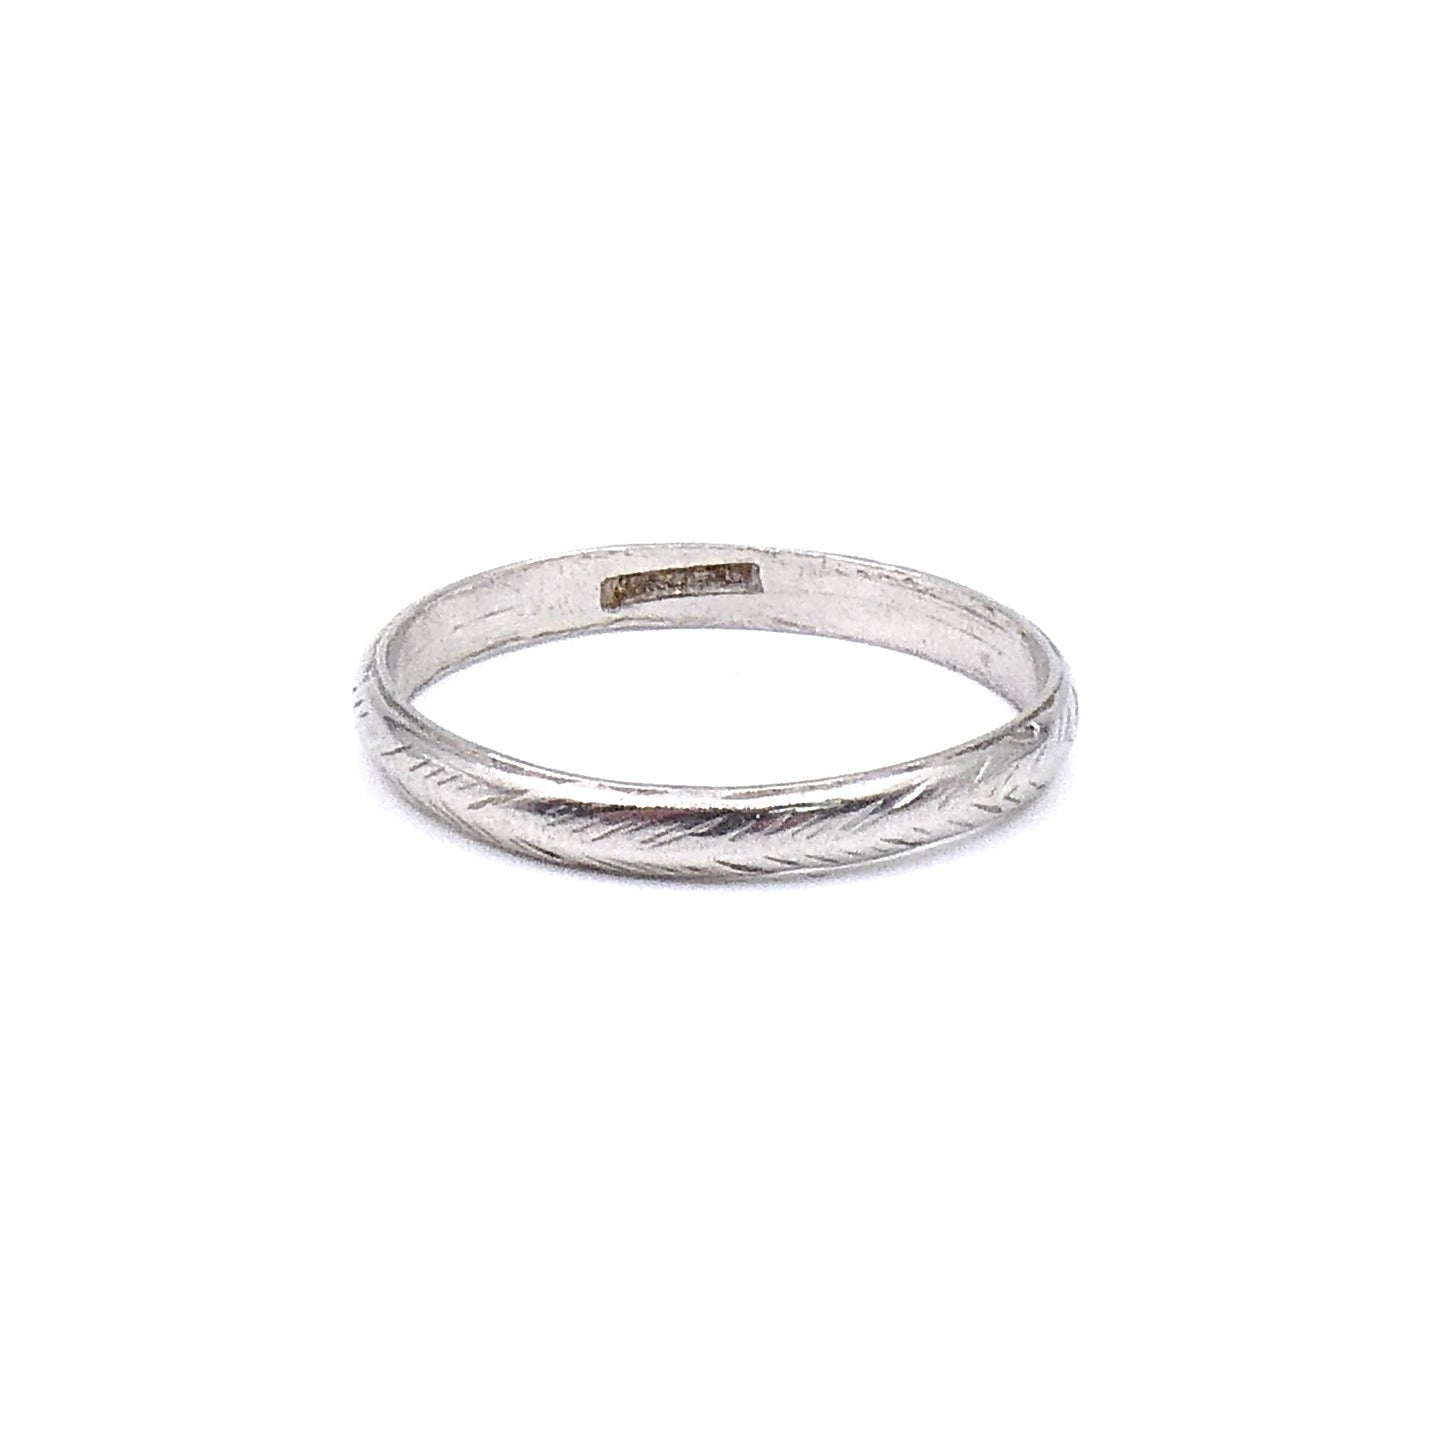 Vintage platinum band with a worn feathered pattern around the band. - Collected